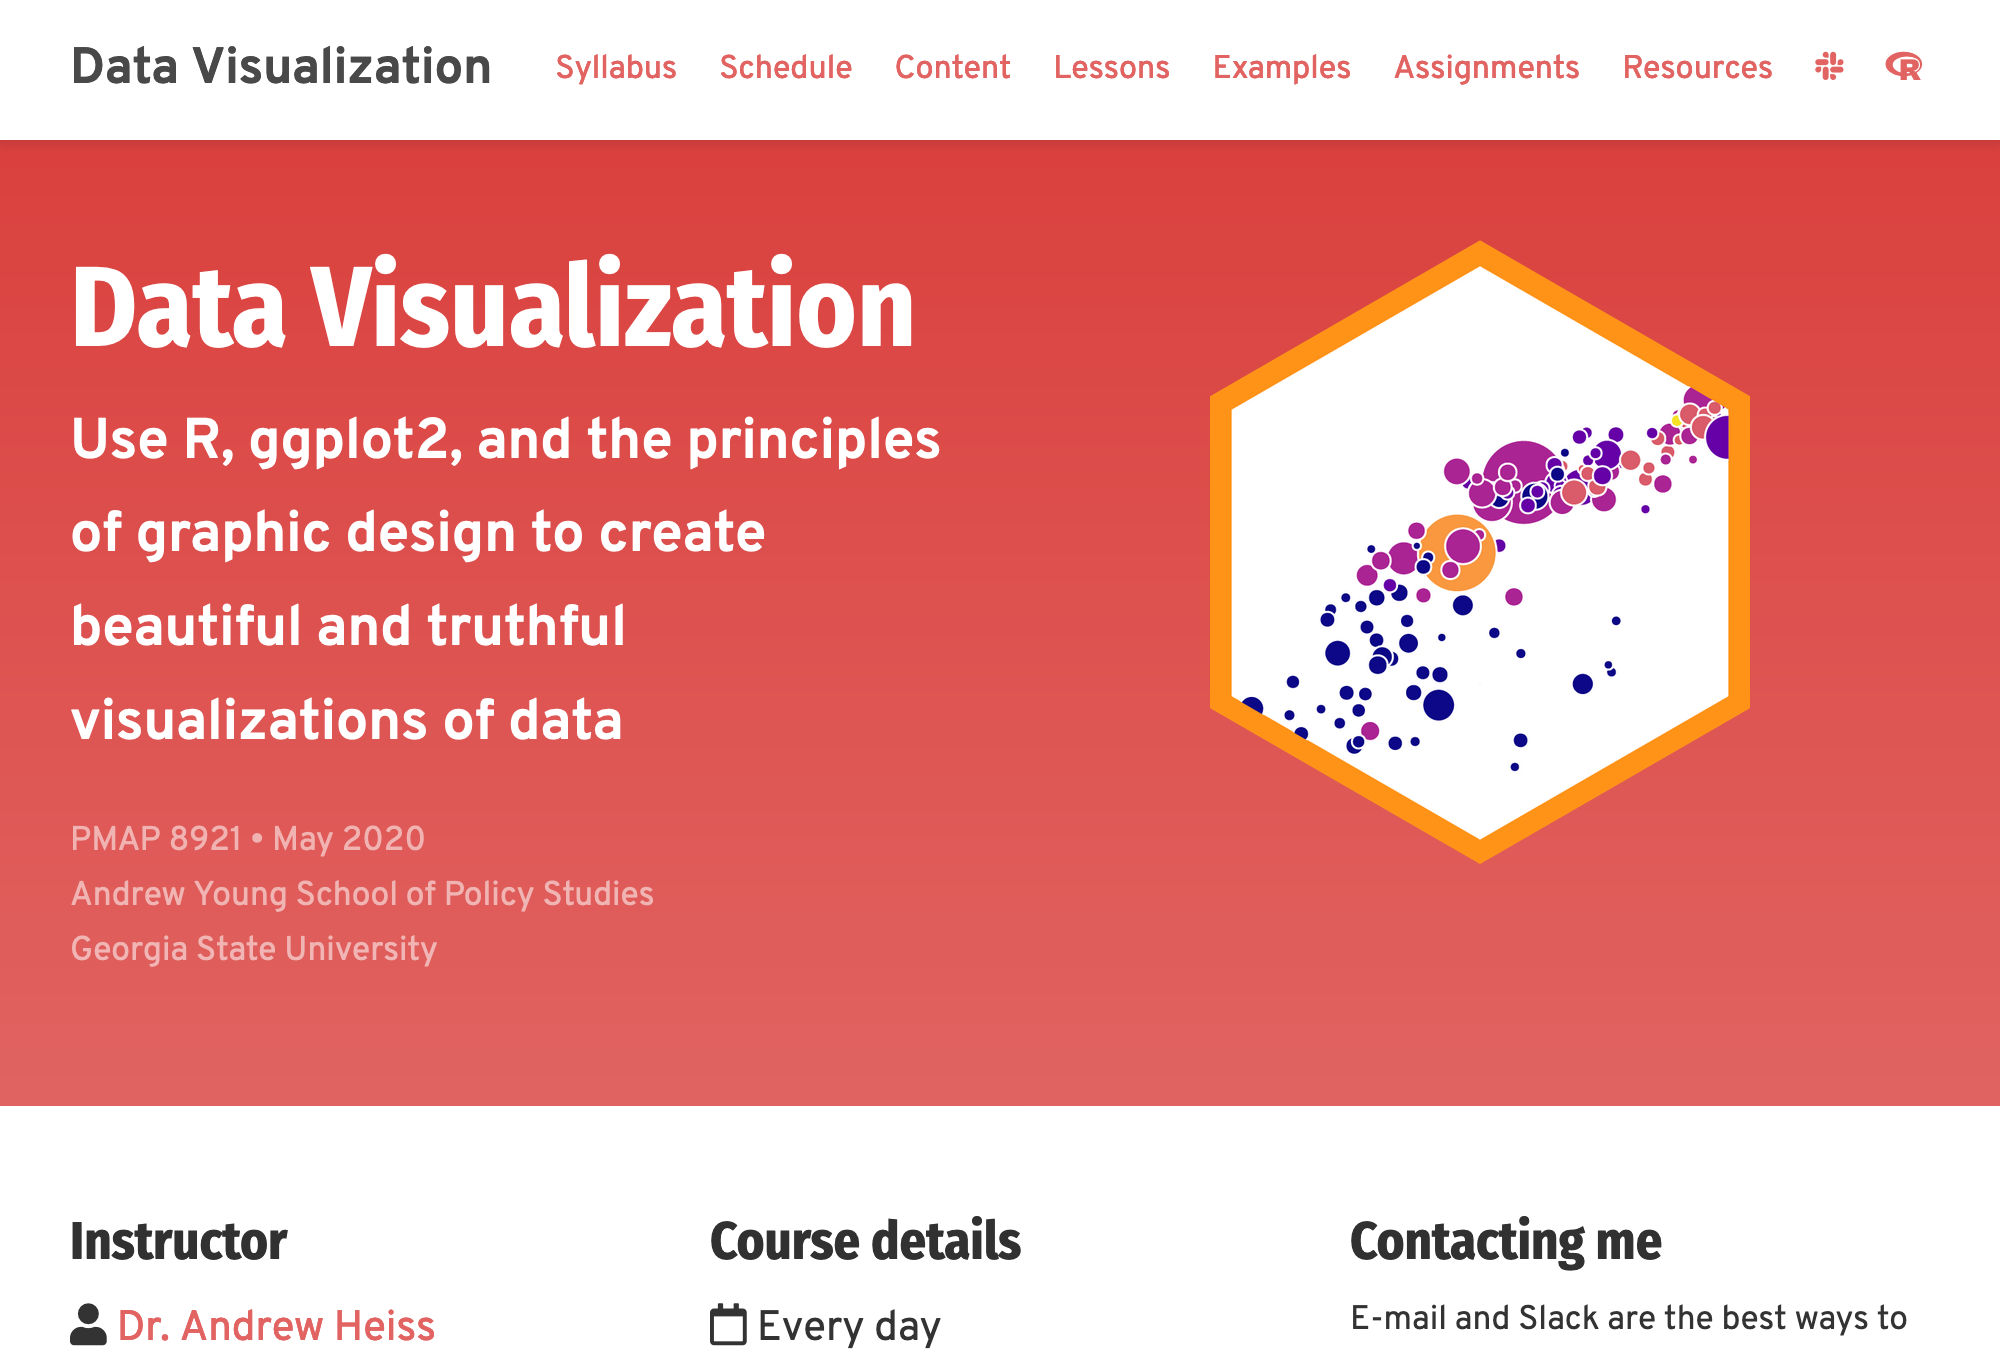 Data Visualization by Dr. Andrew Heiss